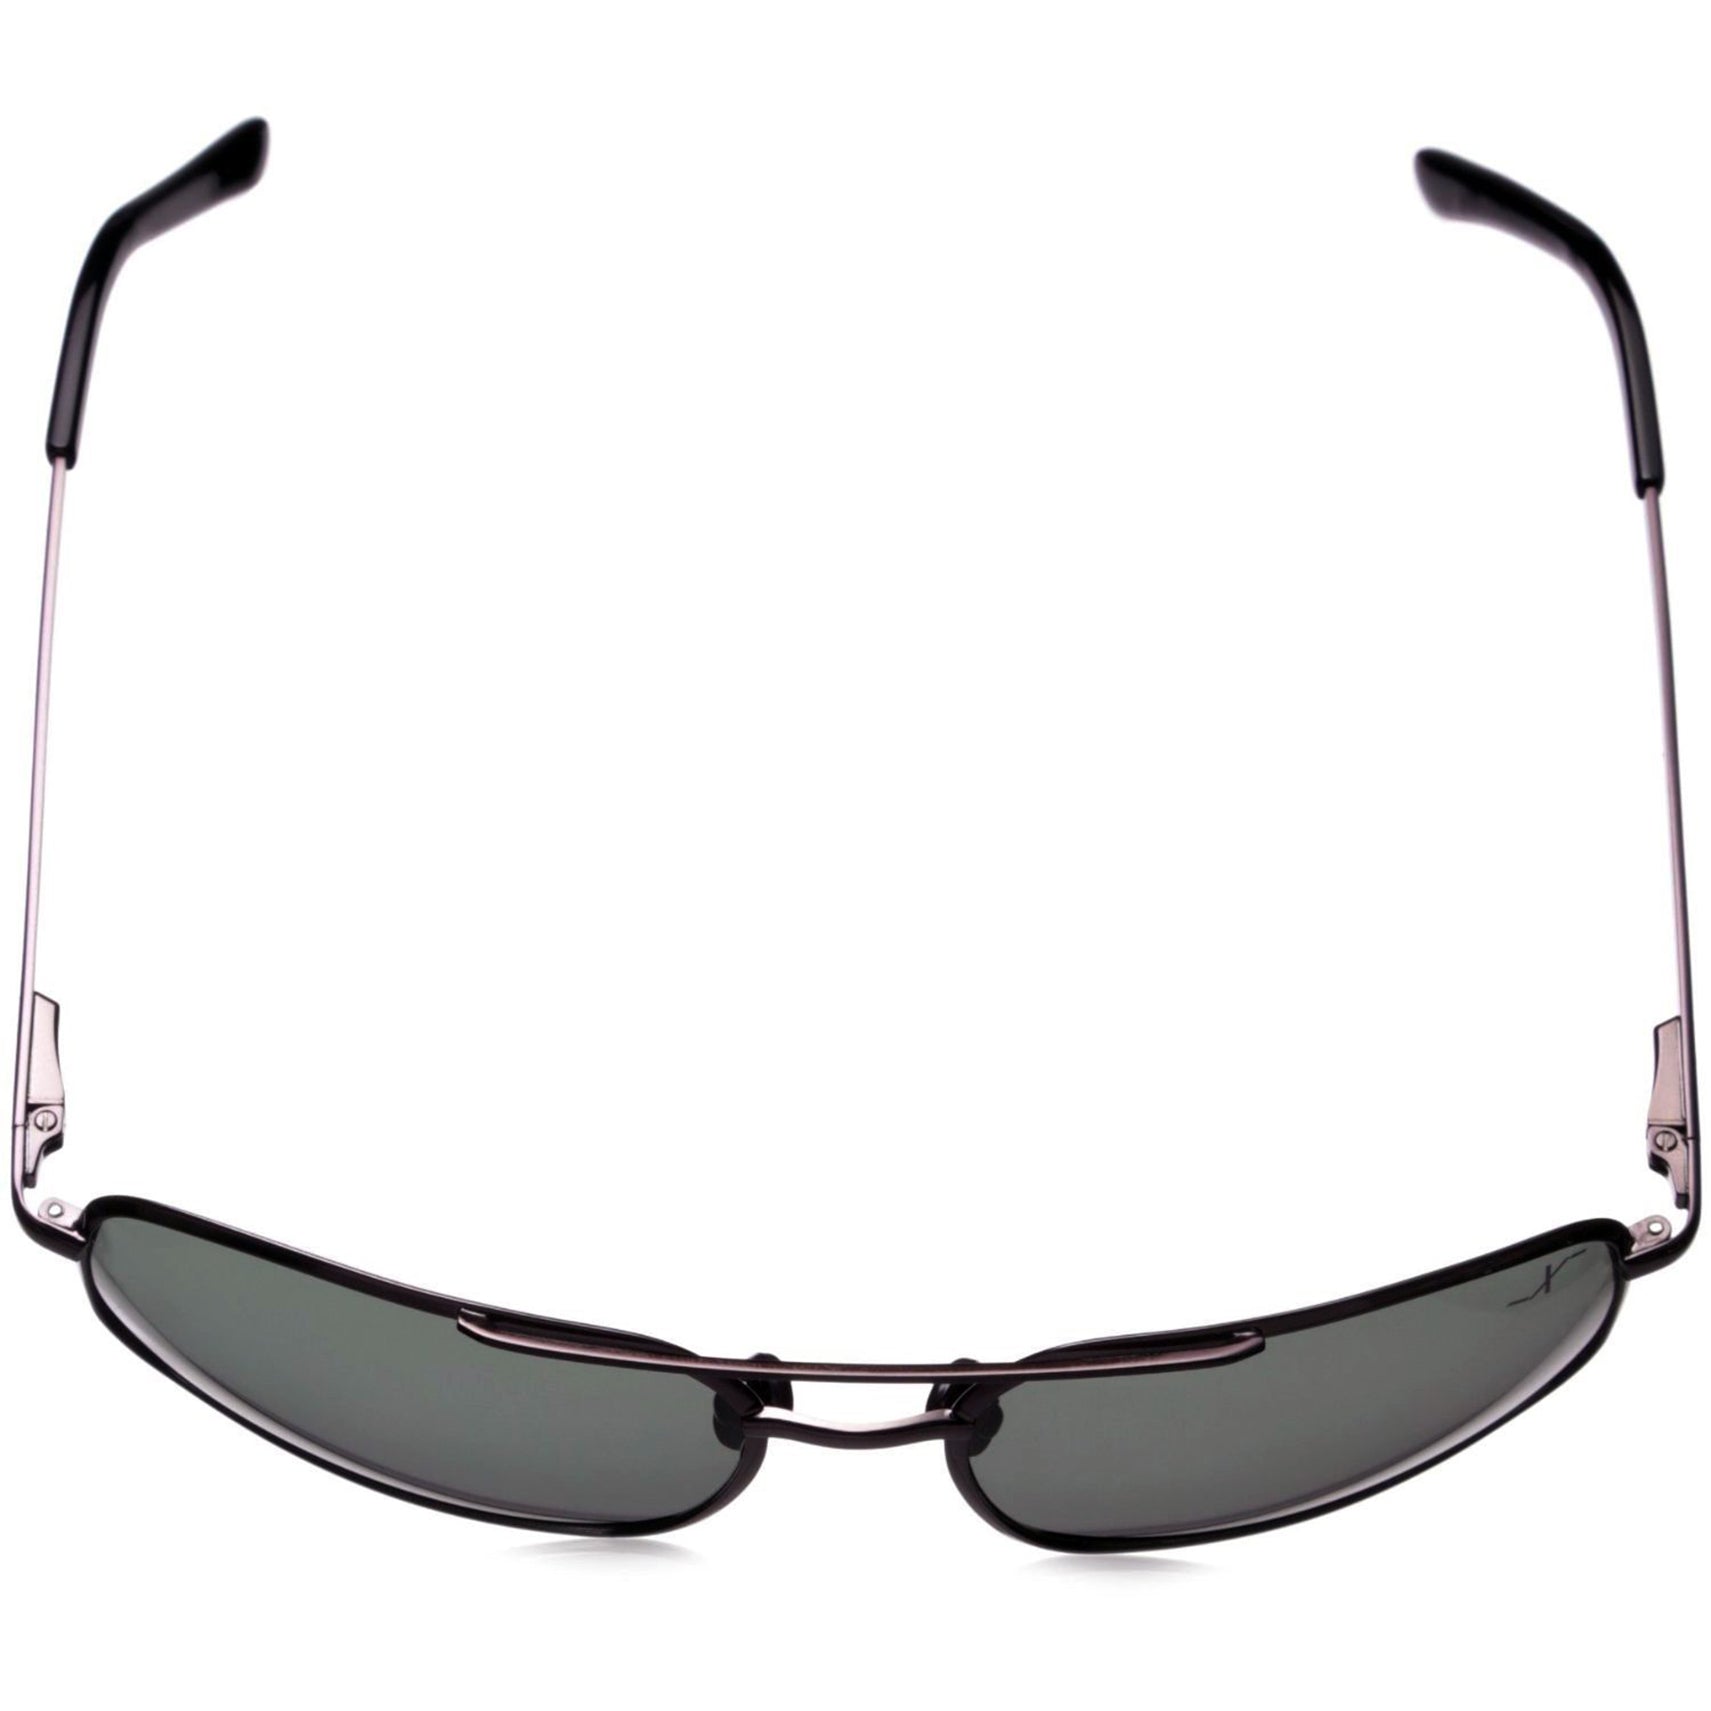 Xezo - Top view of a pair of Air Commando 2400 G sunglasses